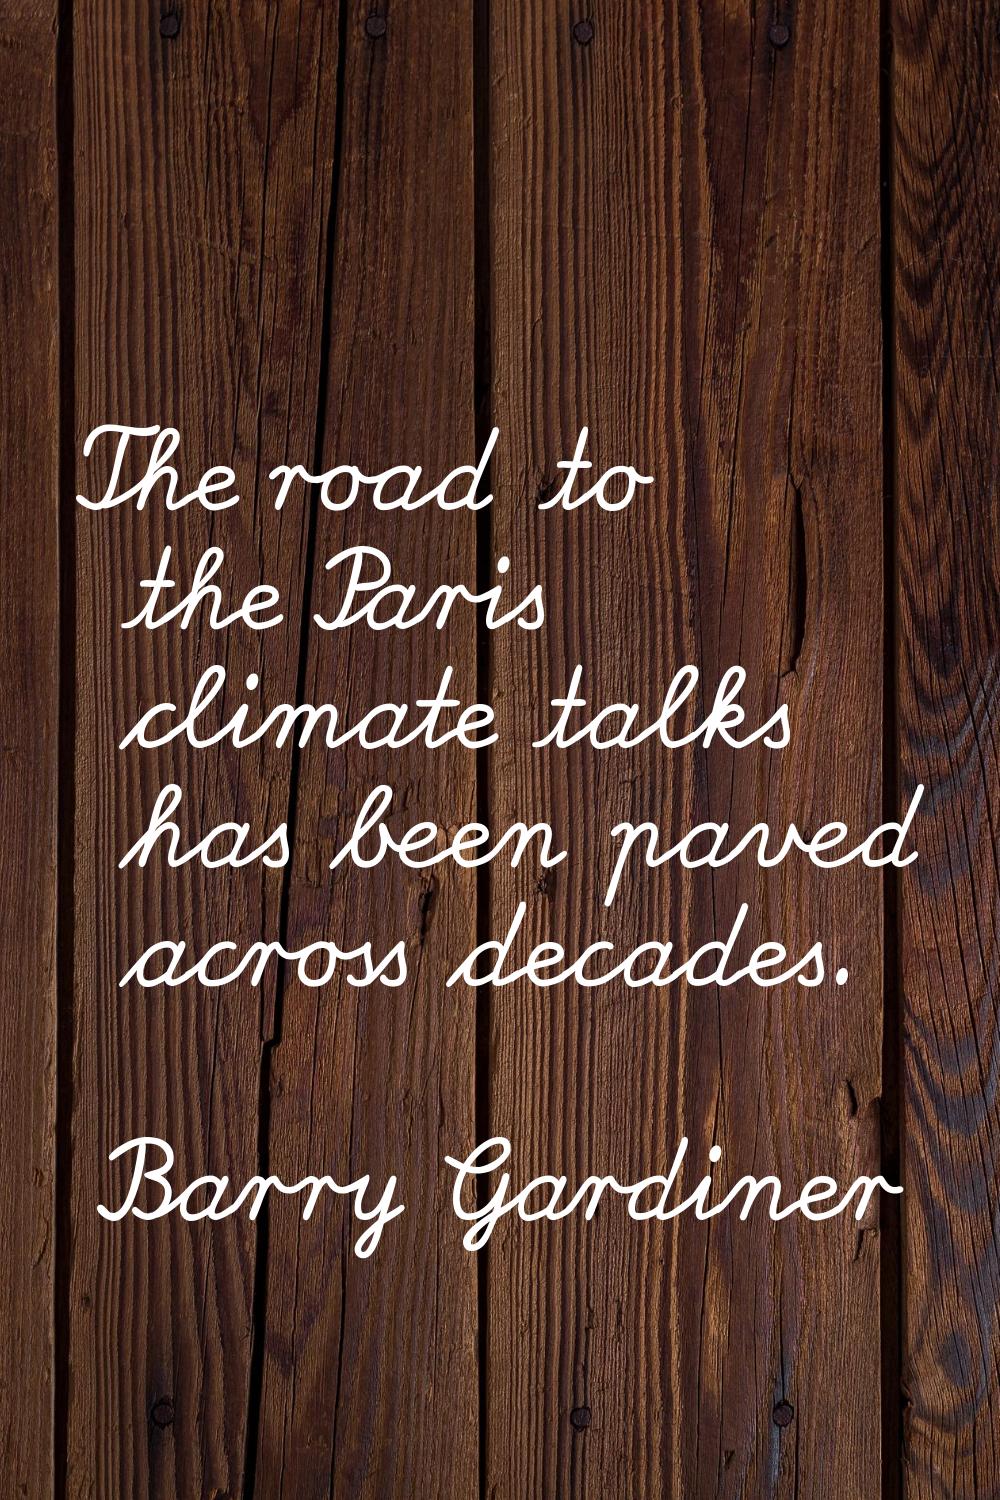 The road to the Paris climate talks has been paved across decades.